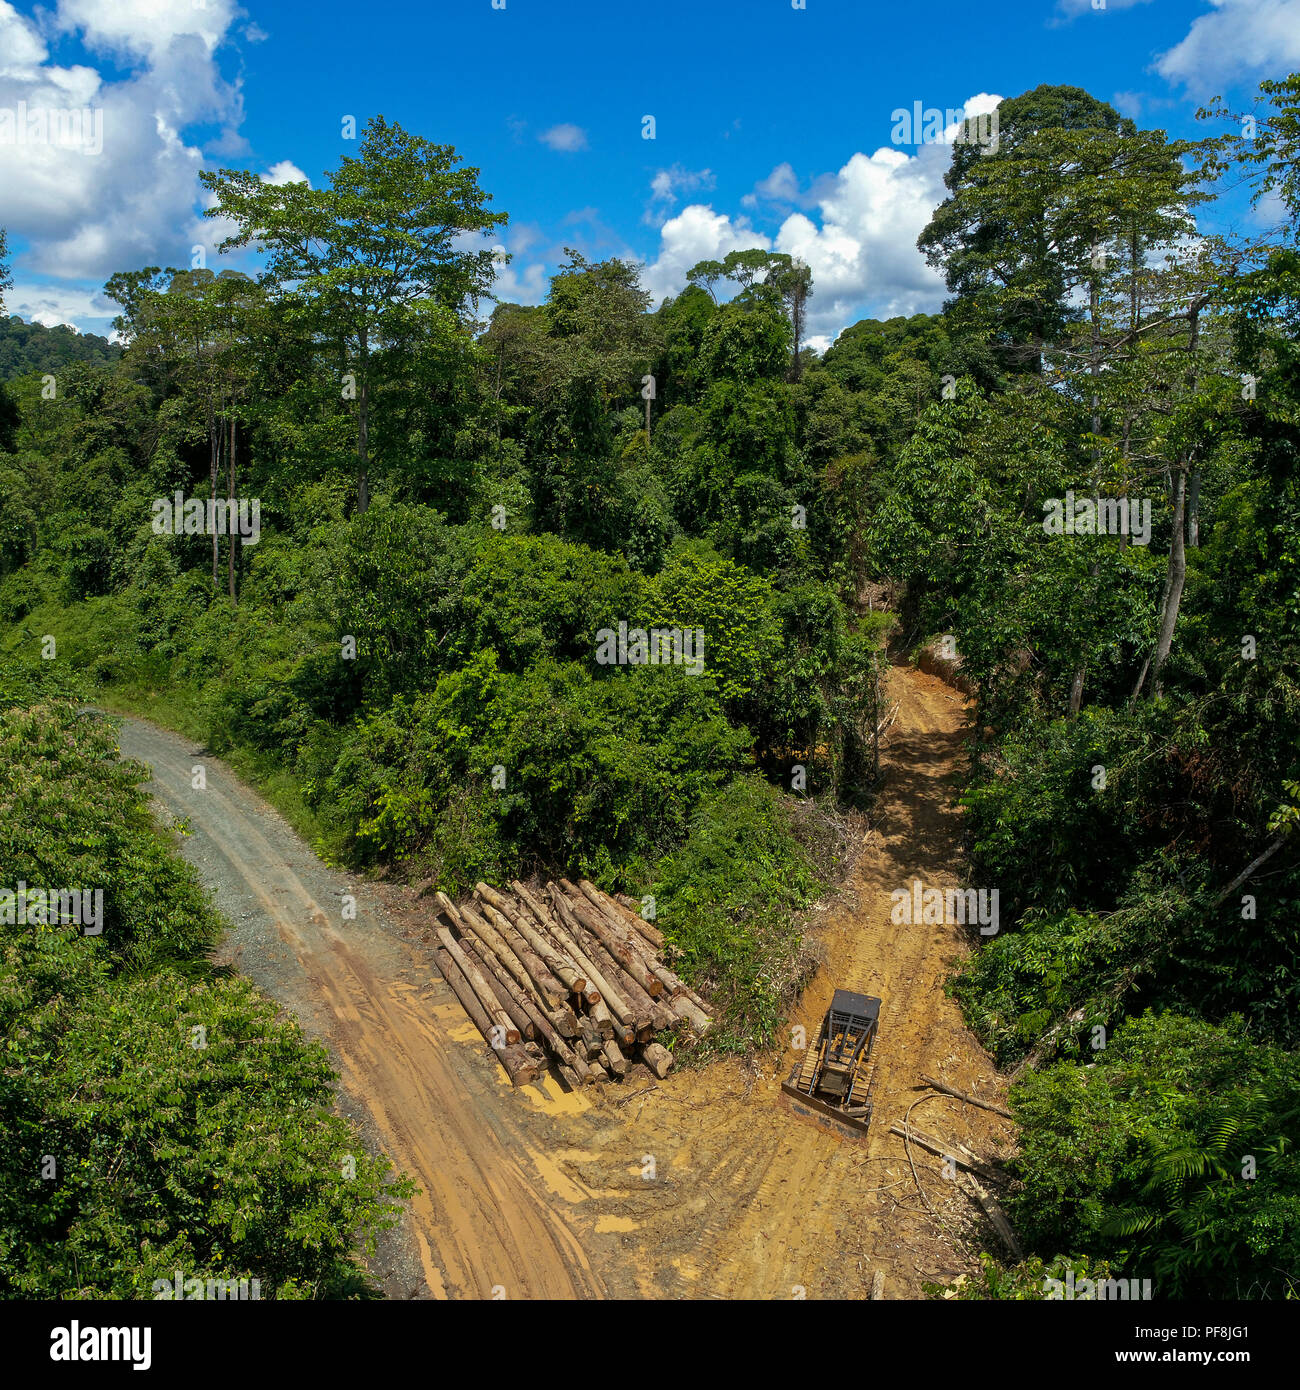 A square, drone photo of timber on a logging road in Deramakot Forest Reserve, Sabah, Malaysian Borneo Stock Photo